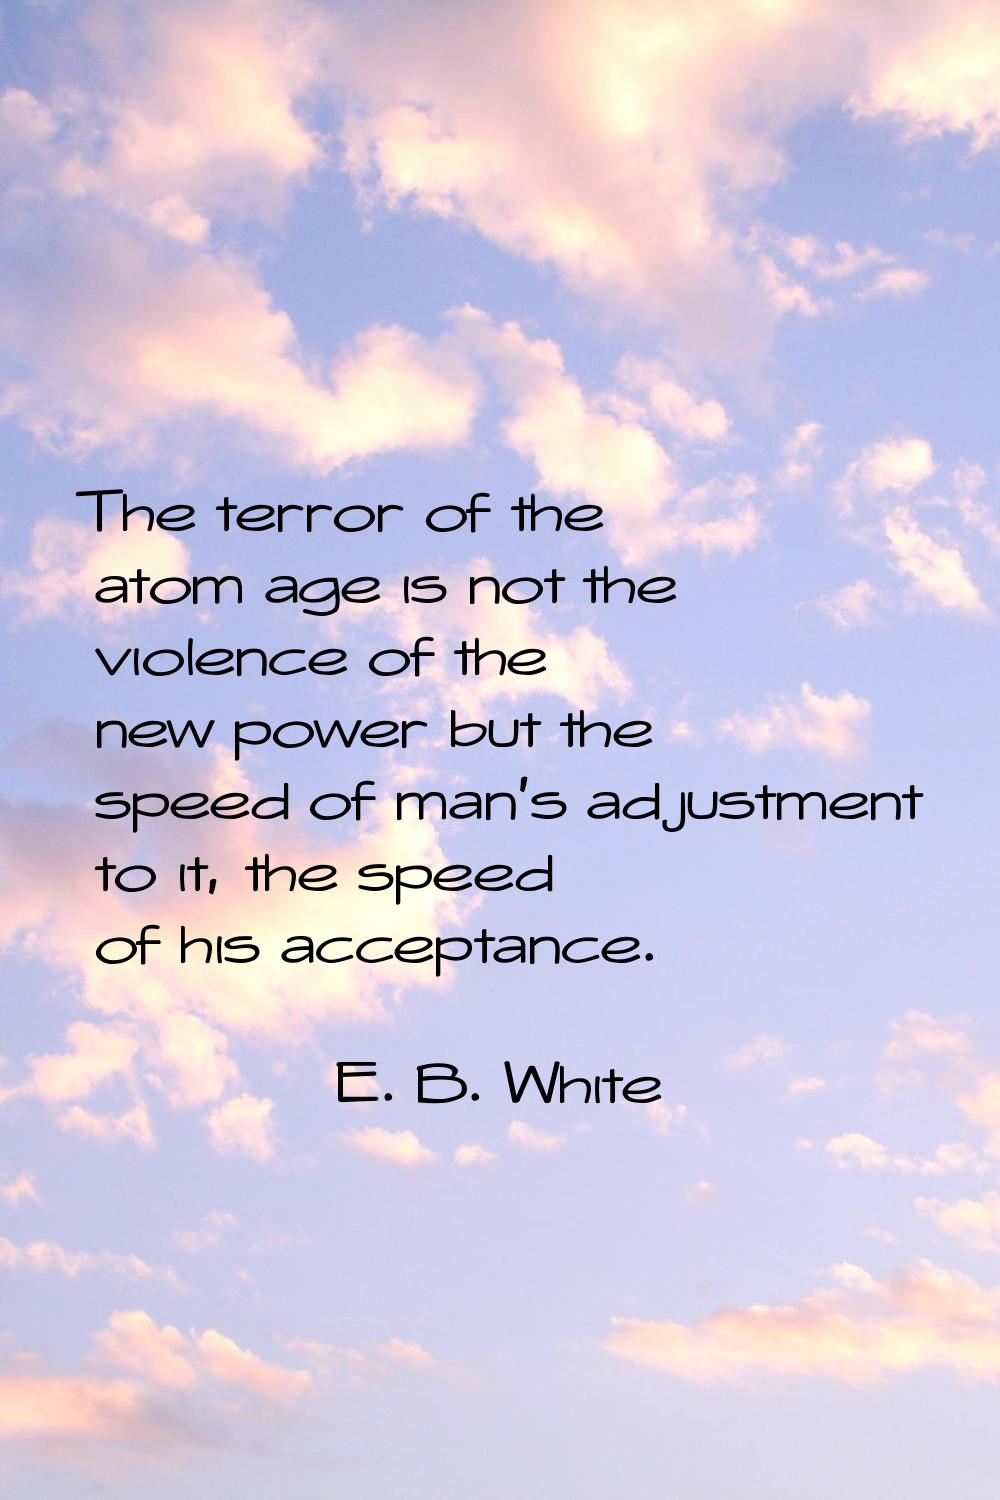 The terror of the atom age is not the violence of the new power but the speed of man's adjustment t